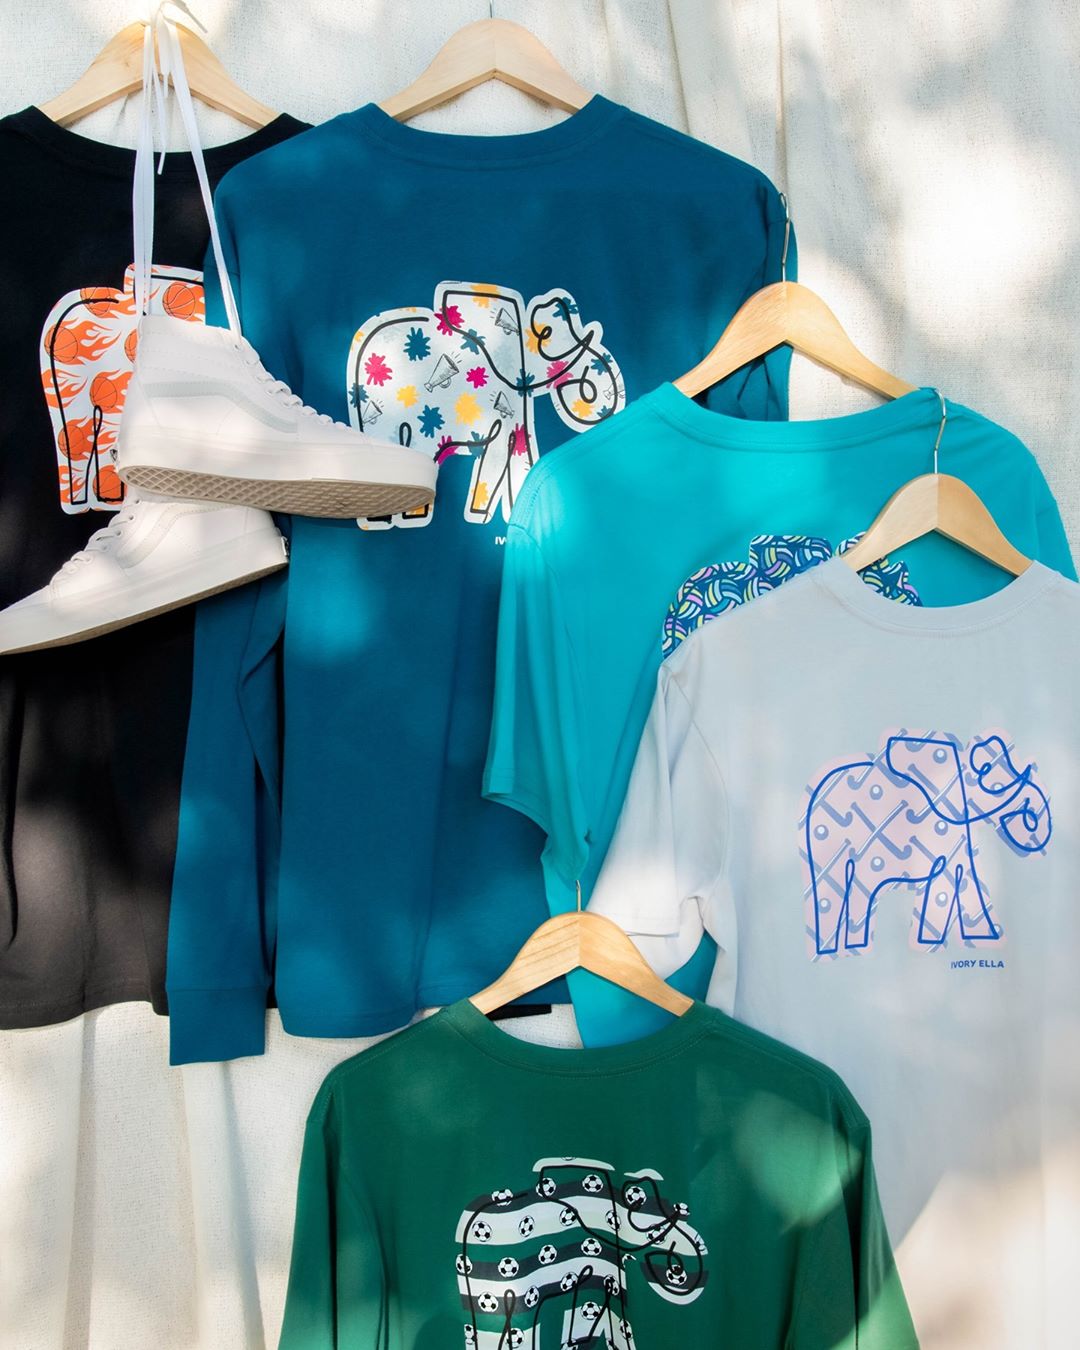 Ivory Ella - Compete with courage, strength, and heart 🐘 💪🏽 Have you shopped our sports tees yet? Get yours today at 25% off with code TEAMIVORYELLA! Tap above to get started 💖 #DreamBigDoGood #IEForM...